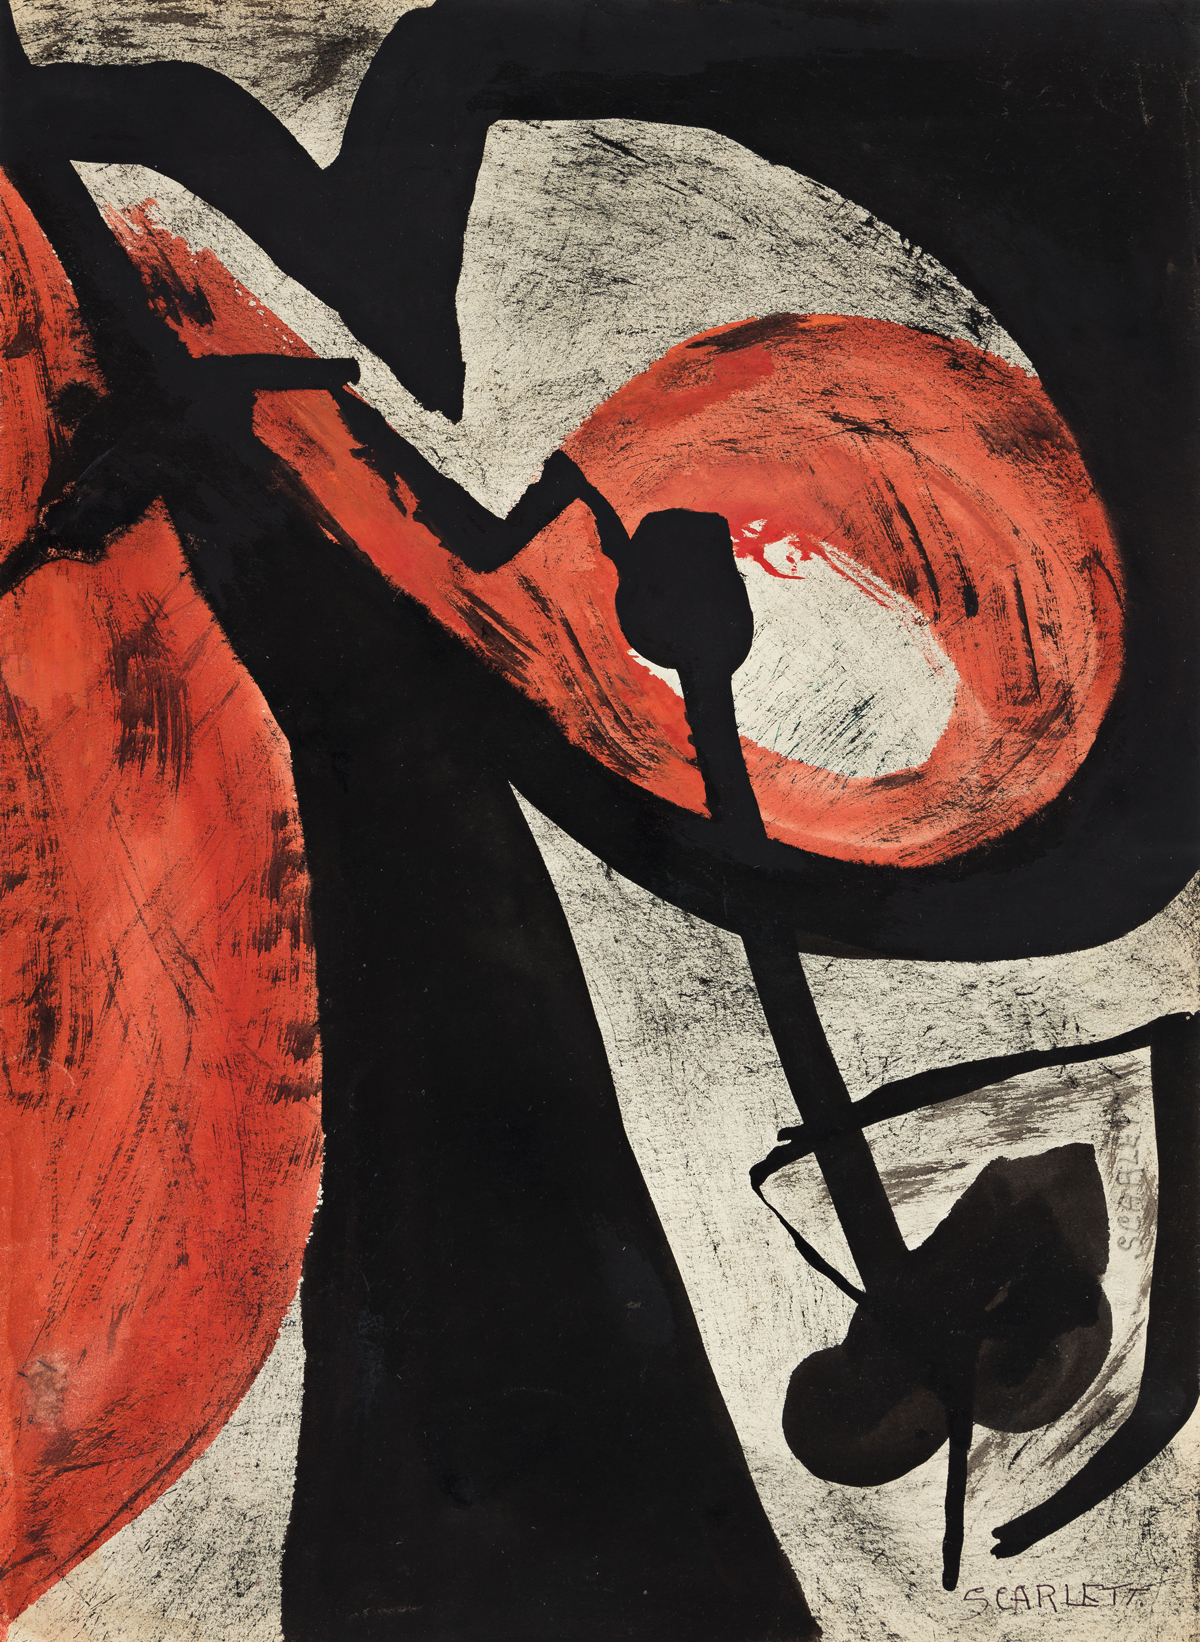 ROLPH SCARLETT (1889 - 1984, CANADIAN/AMERICAN) Untitled, (Study in Red and Black).